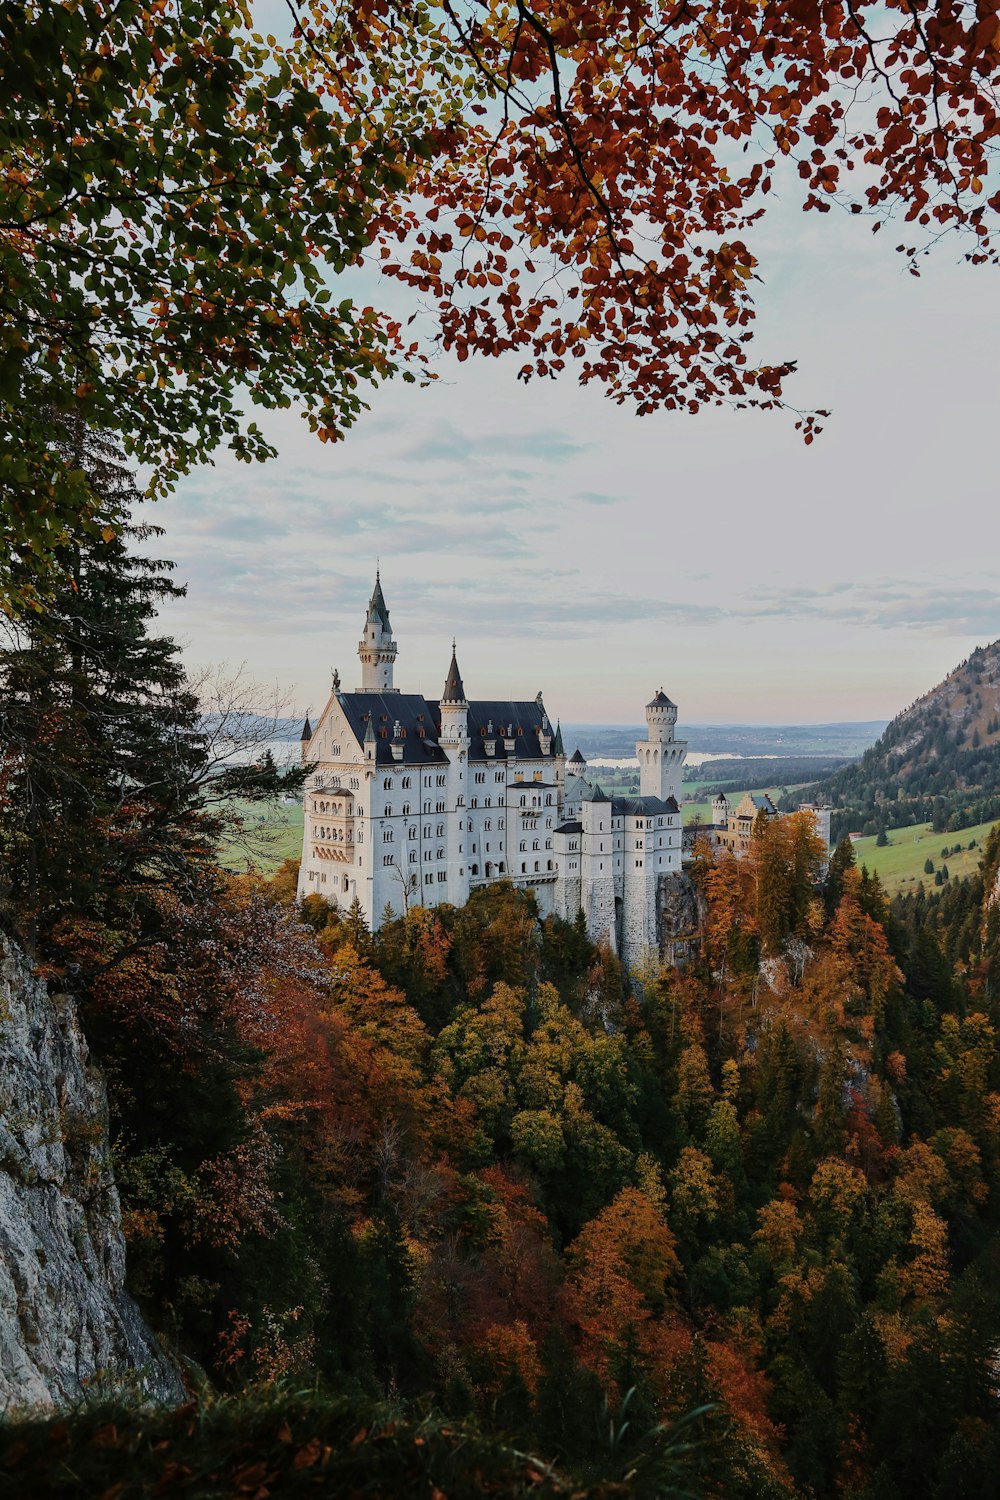 a castle on a hill with Neuschwanstein Castle in the background